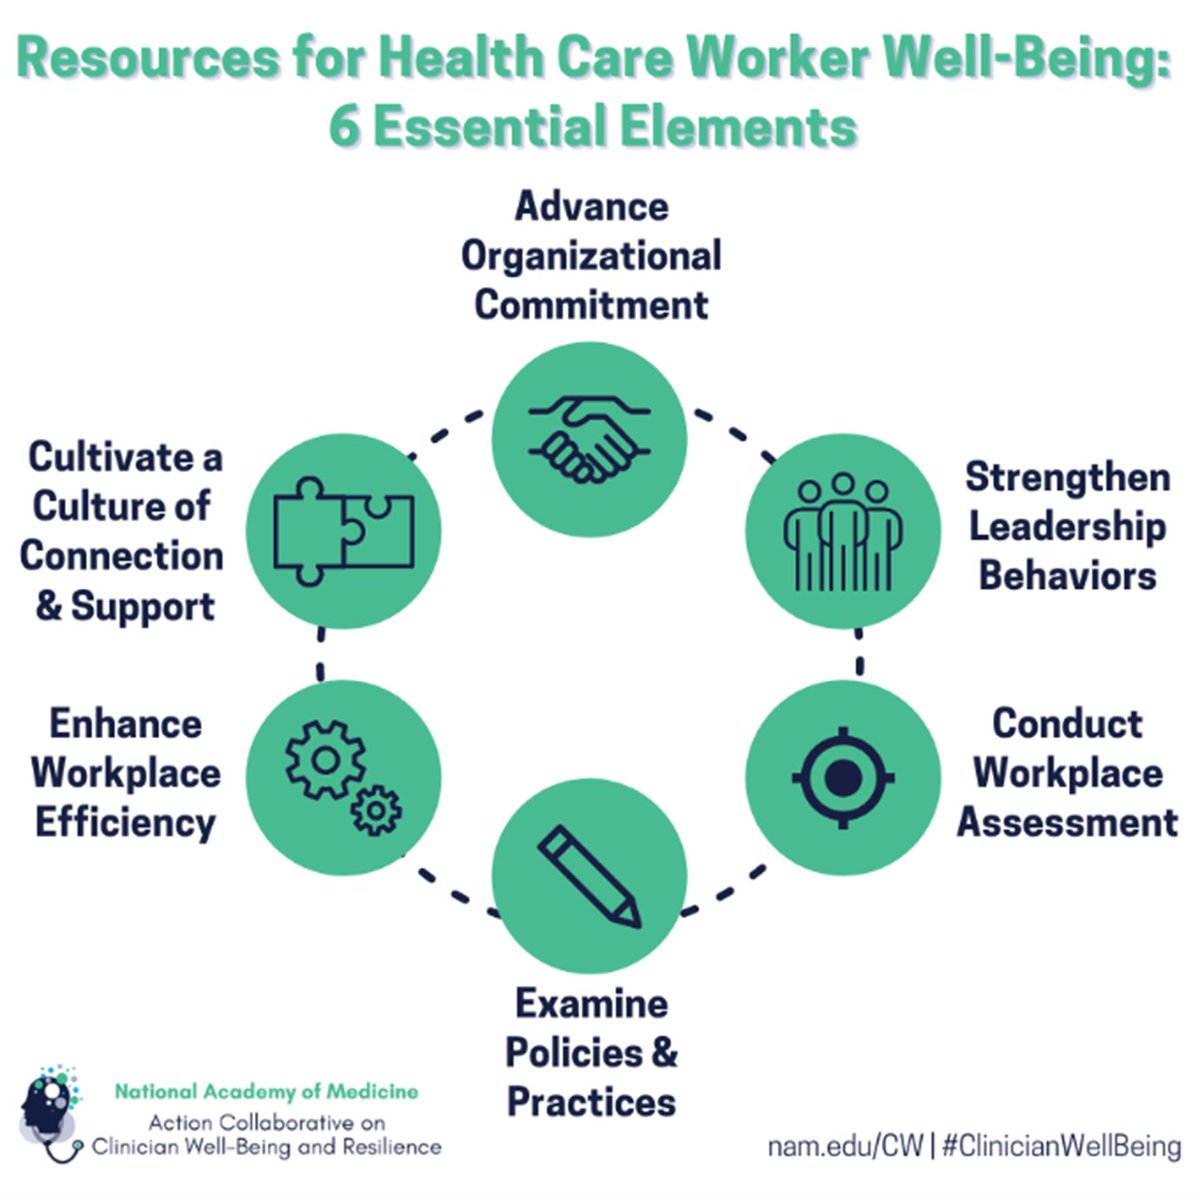 #MentalHealthAwarenessMonth is a great time for health care leaders and workers to examine the Resource Compendium for Health Care Worker Well-Being, an expansive collection of resources to help decrease #burnout and improve #clinicianwellbeing. It is available for free on